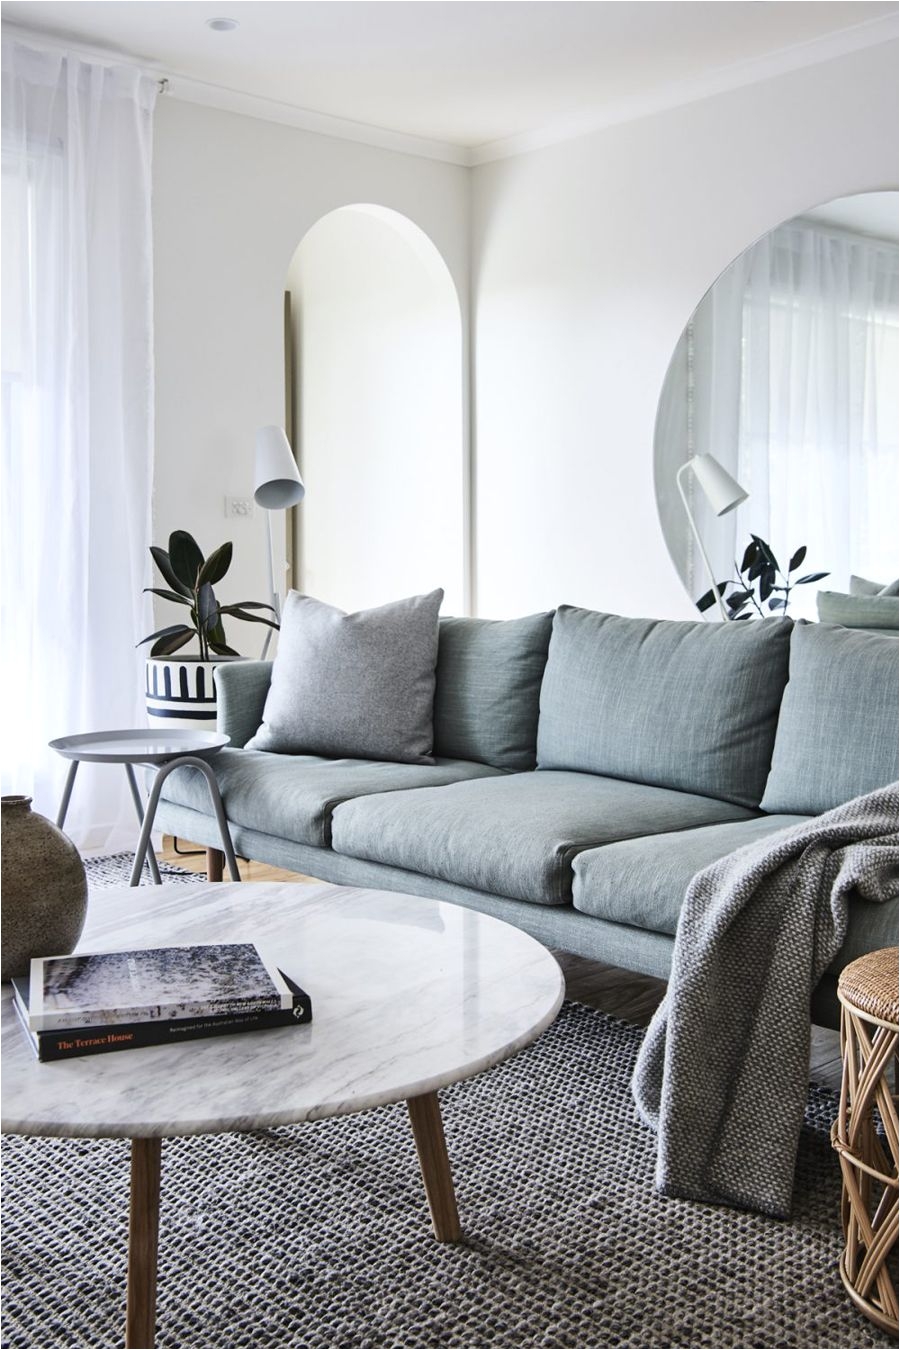 White Marble table with muted blue couch